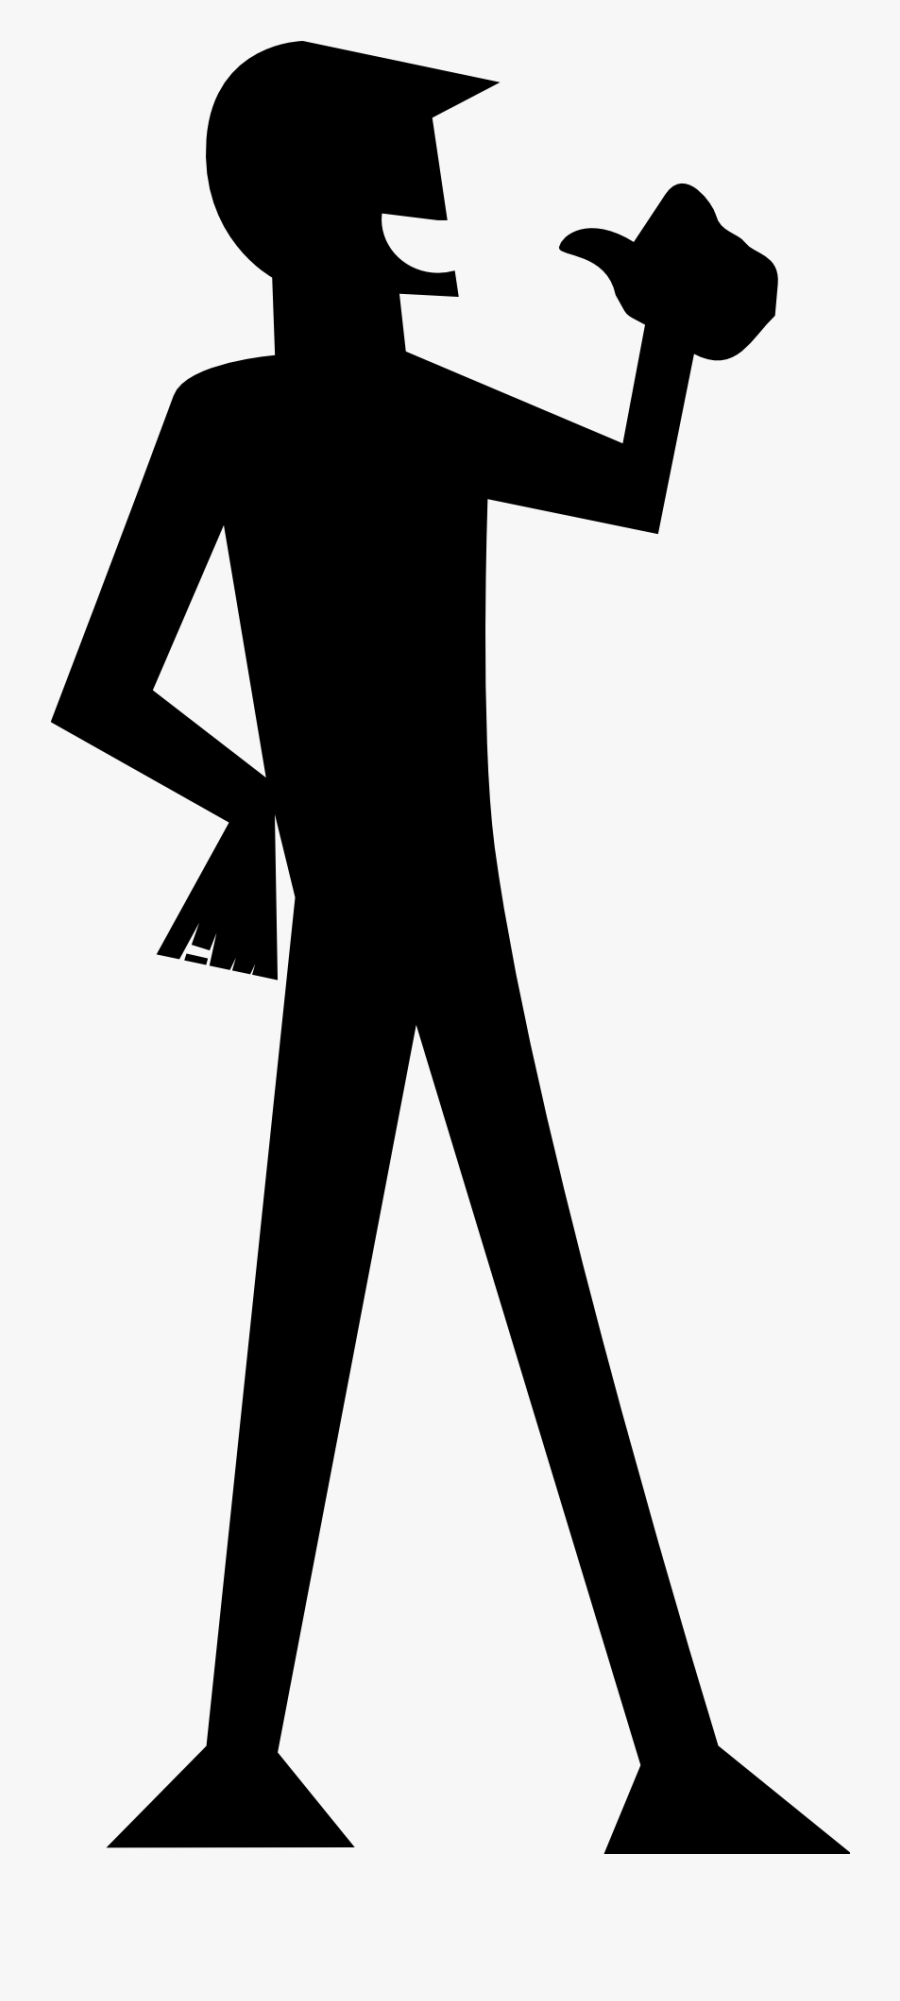 Thumb Pointing At Self, Transparent Clipart